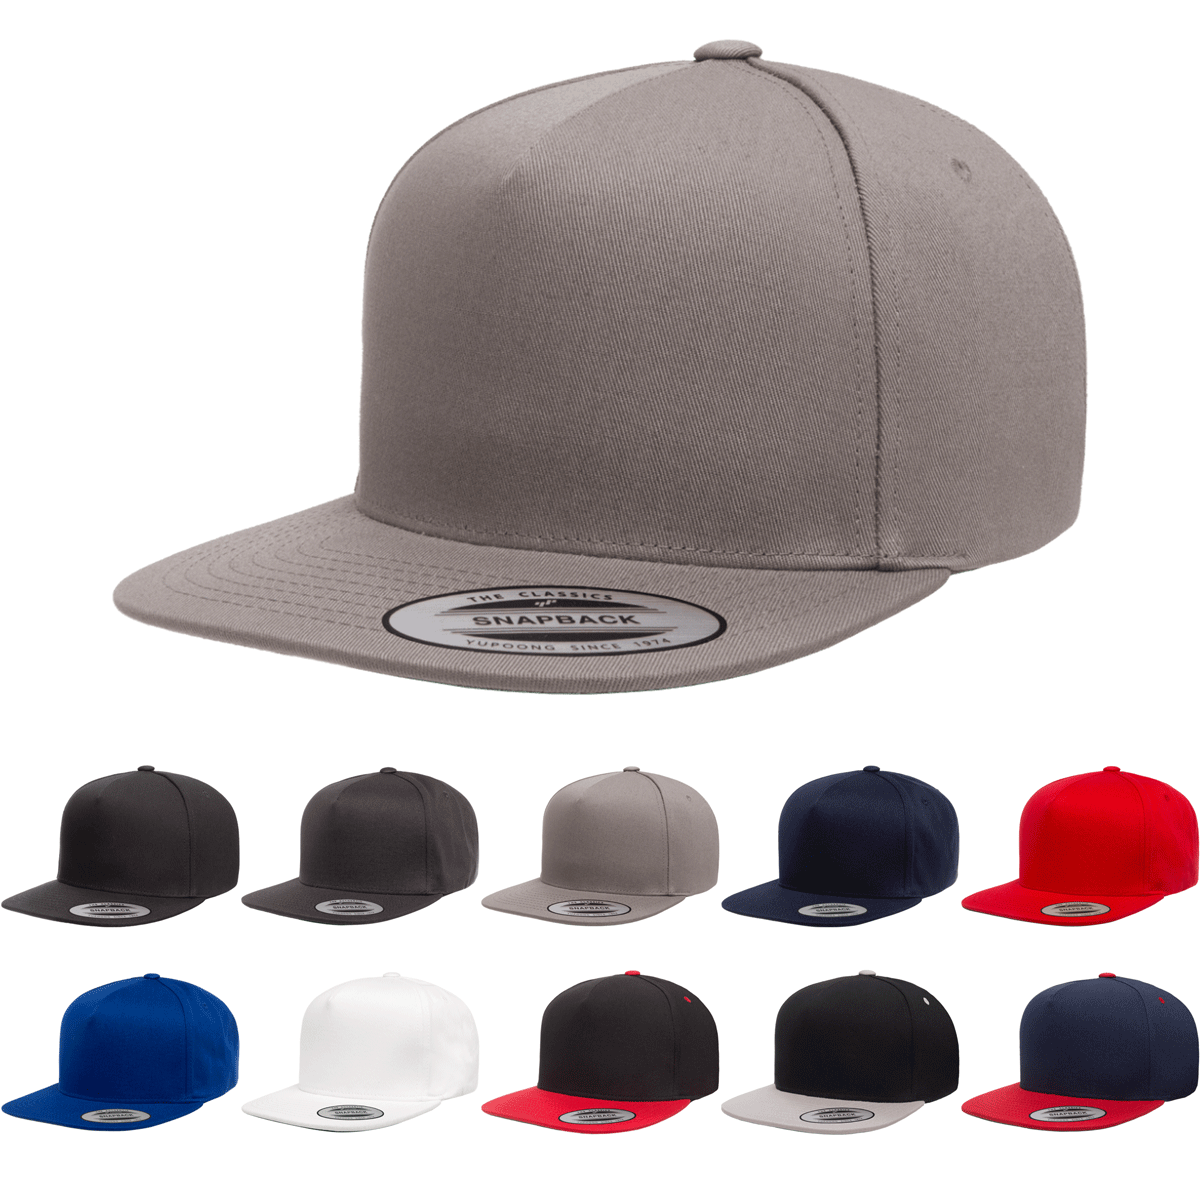 Yupoong Snaback Classics®, – Wholesale 6007 - Cotton 5-Panel YP The Twill Park Cap